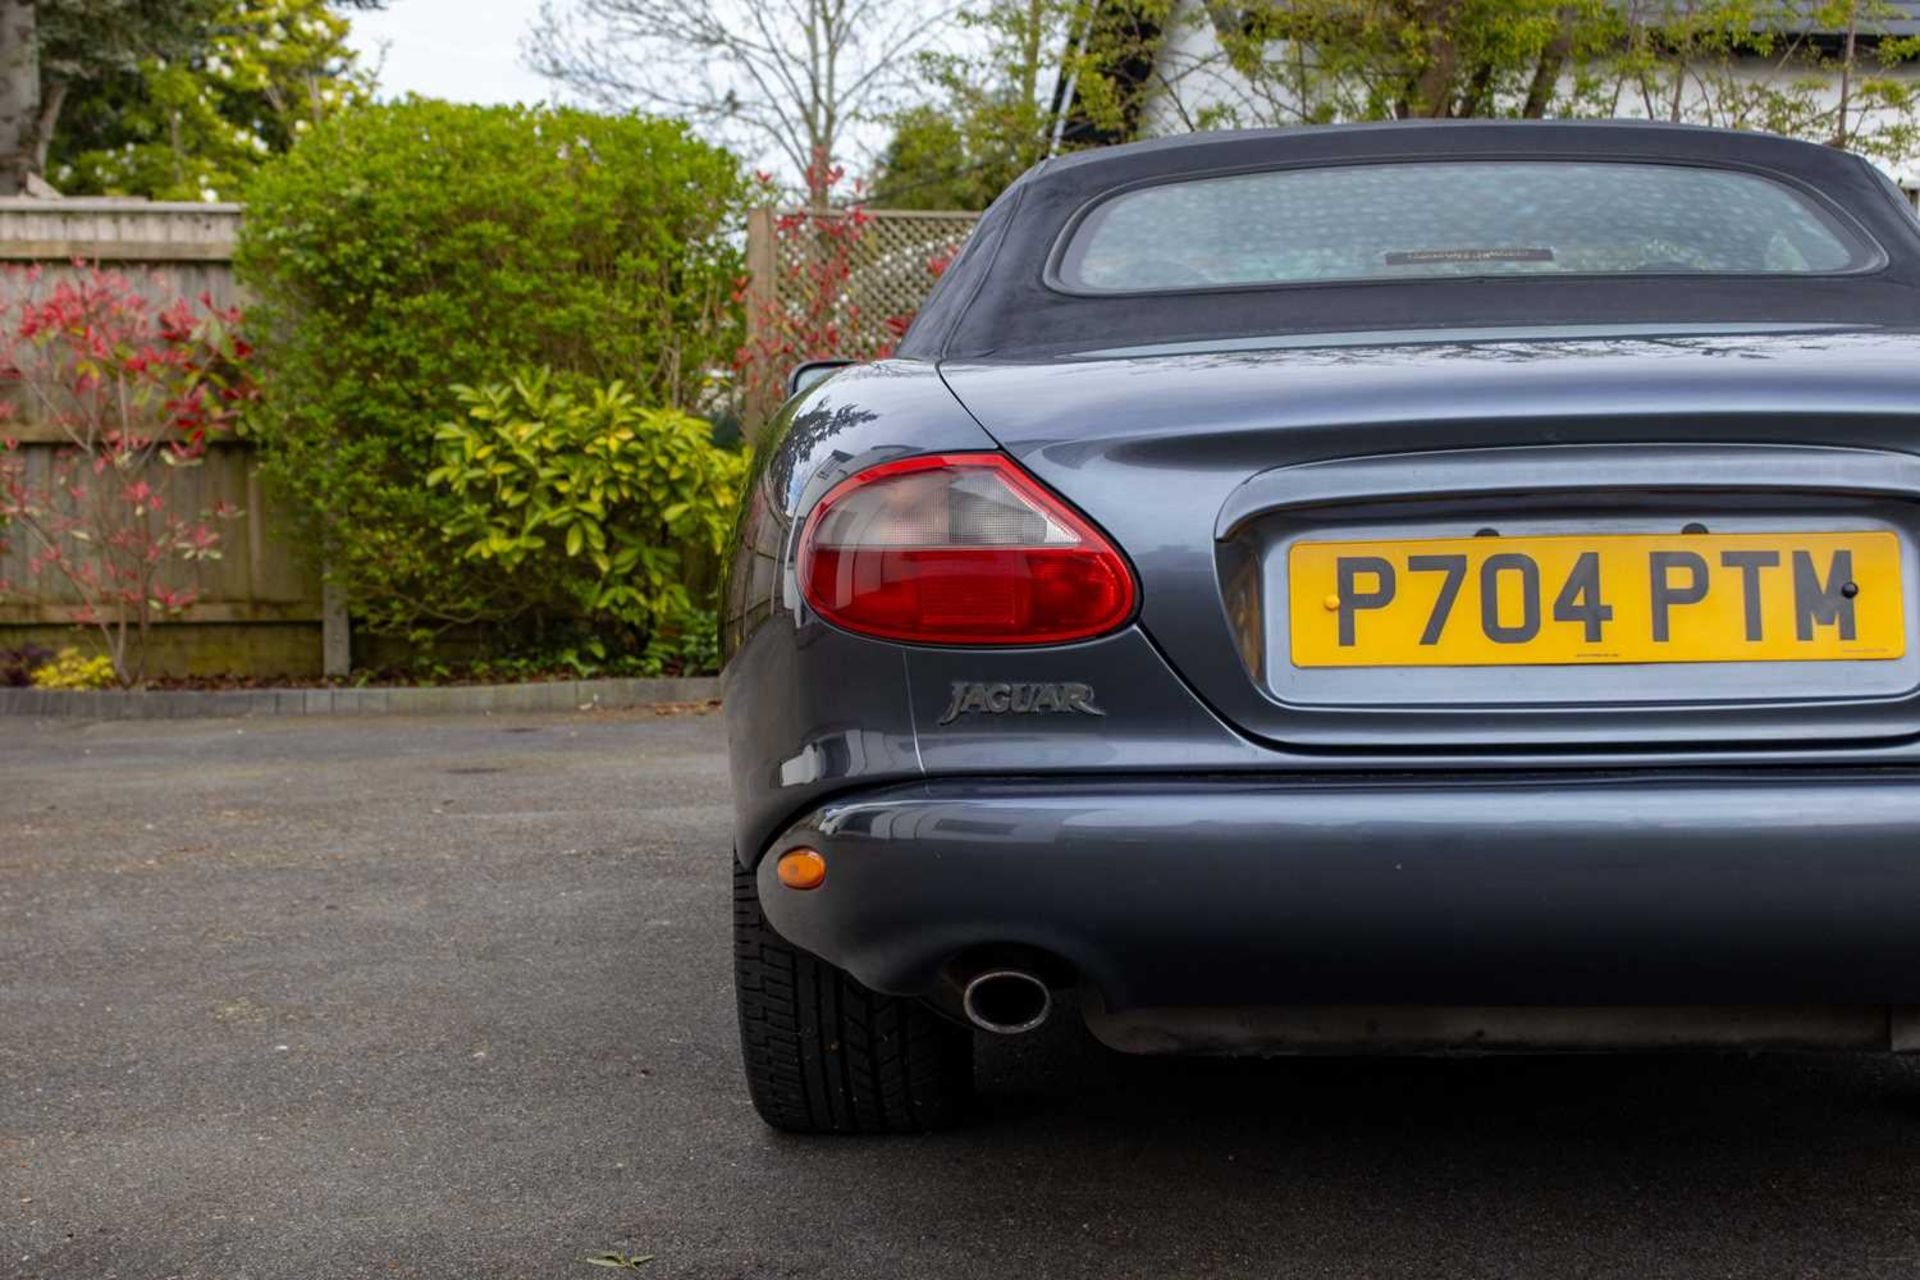 1997 Jaguar XK8 Convertible ***NO RESERVE*** Only one former keeper and full service history  - Image 13 of 89